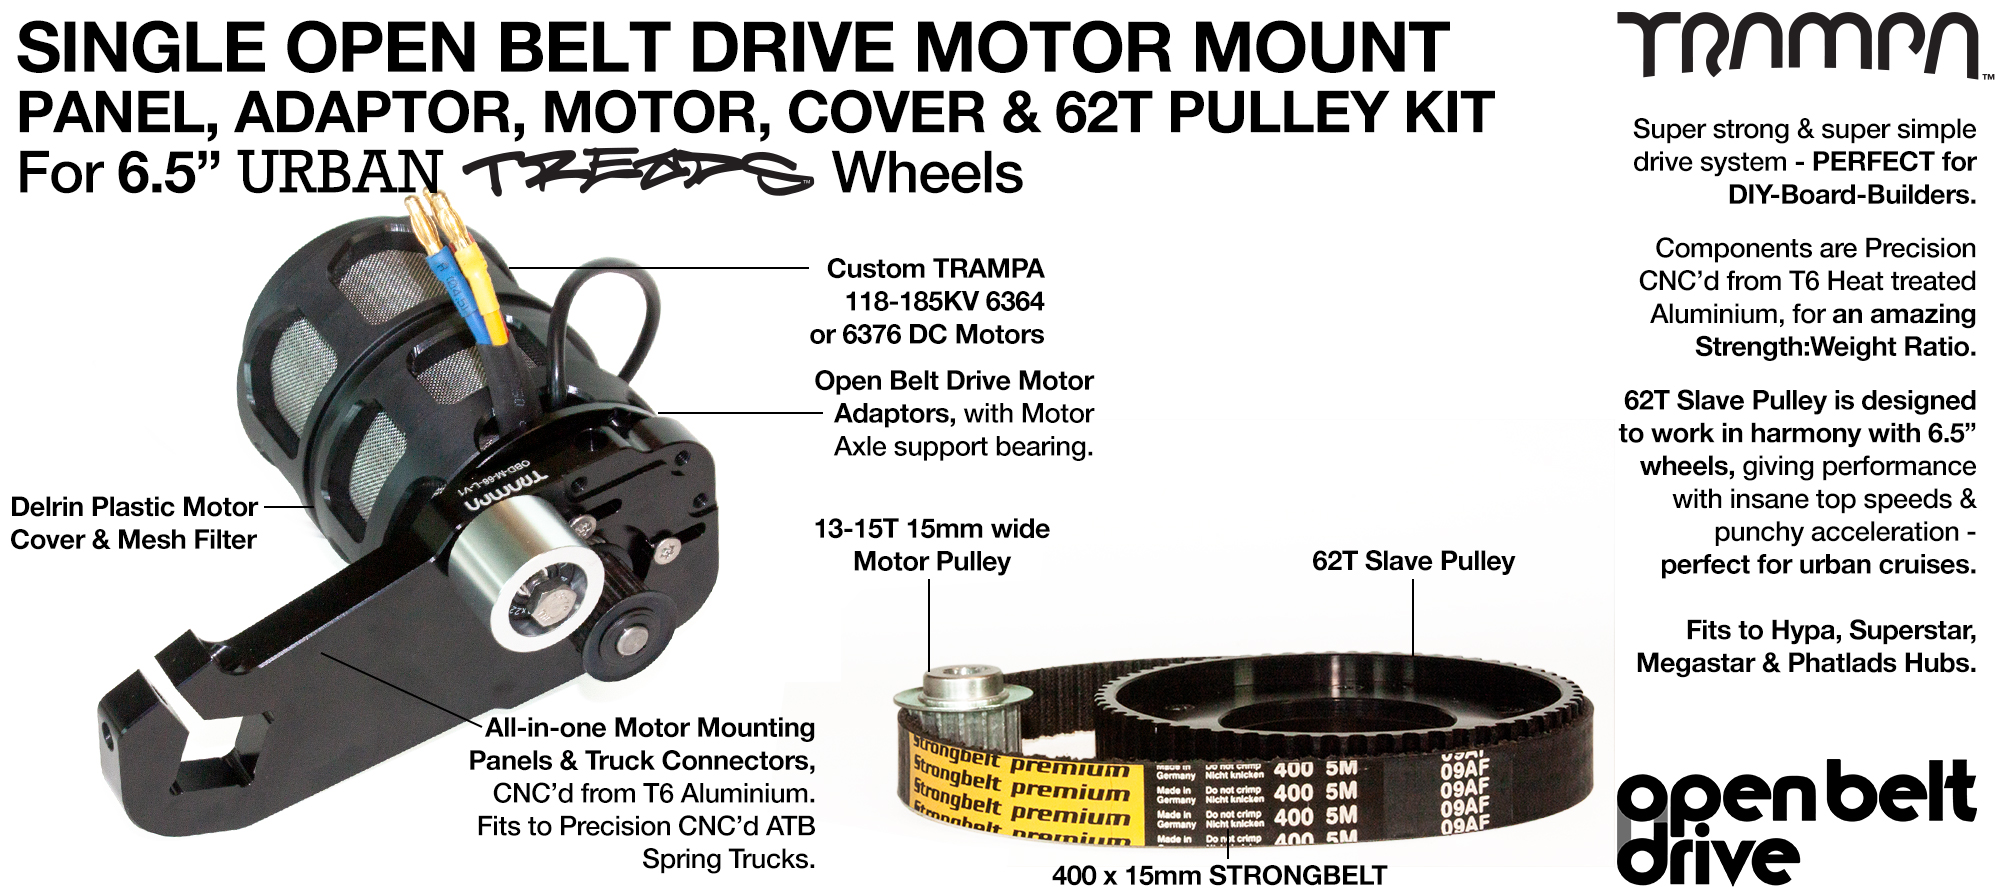 66T OBD Motor Mount with 62Tooth Pulley kit, Motor & Filters  - SINGLE